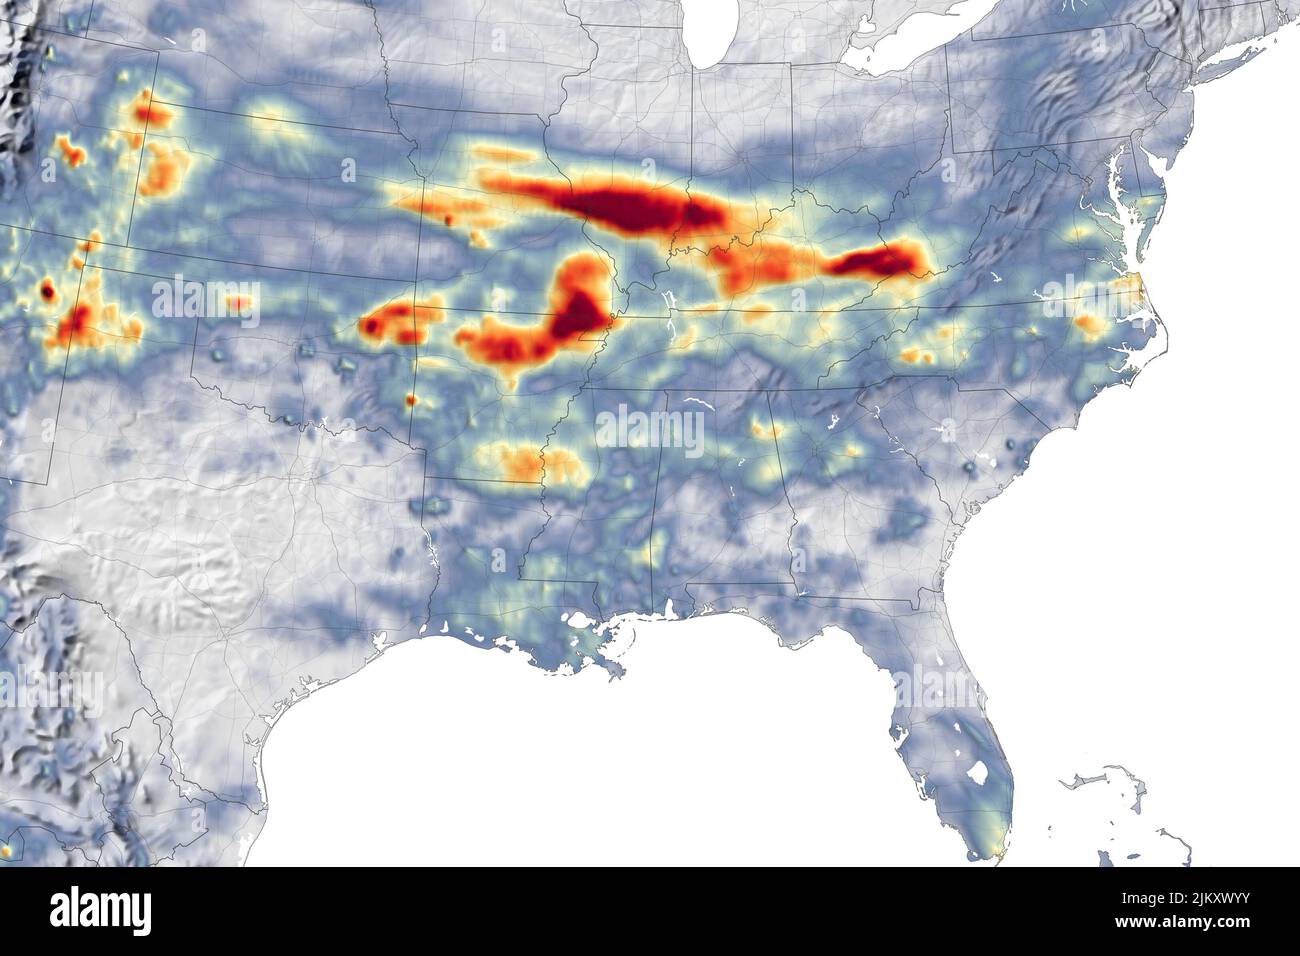 Usa. 2nd Aug, 2022. July 25 - 31, 2022. Record-breaking rainfall brought devastating flash floods and landslides to Missouri, Kentucky, and other parts of the central United States in the last week of July 2022. As noted previously by the Intergovernmental Panel on Climate Change and the American Meteorological Society, extreme precipitation events and weather are becoming more likely with climate change. The map above depicts a satellite-based estimate of rainfall from July 25-31, 2022. The darkest reds reflect the highest rainfall amounts, with broad swaths of Missouri, Arkansas, Illinois Stock Photo